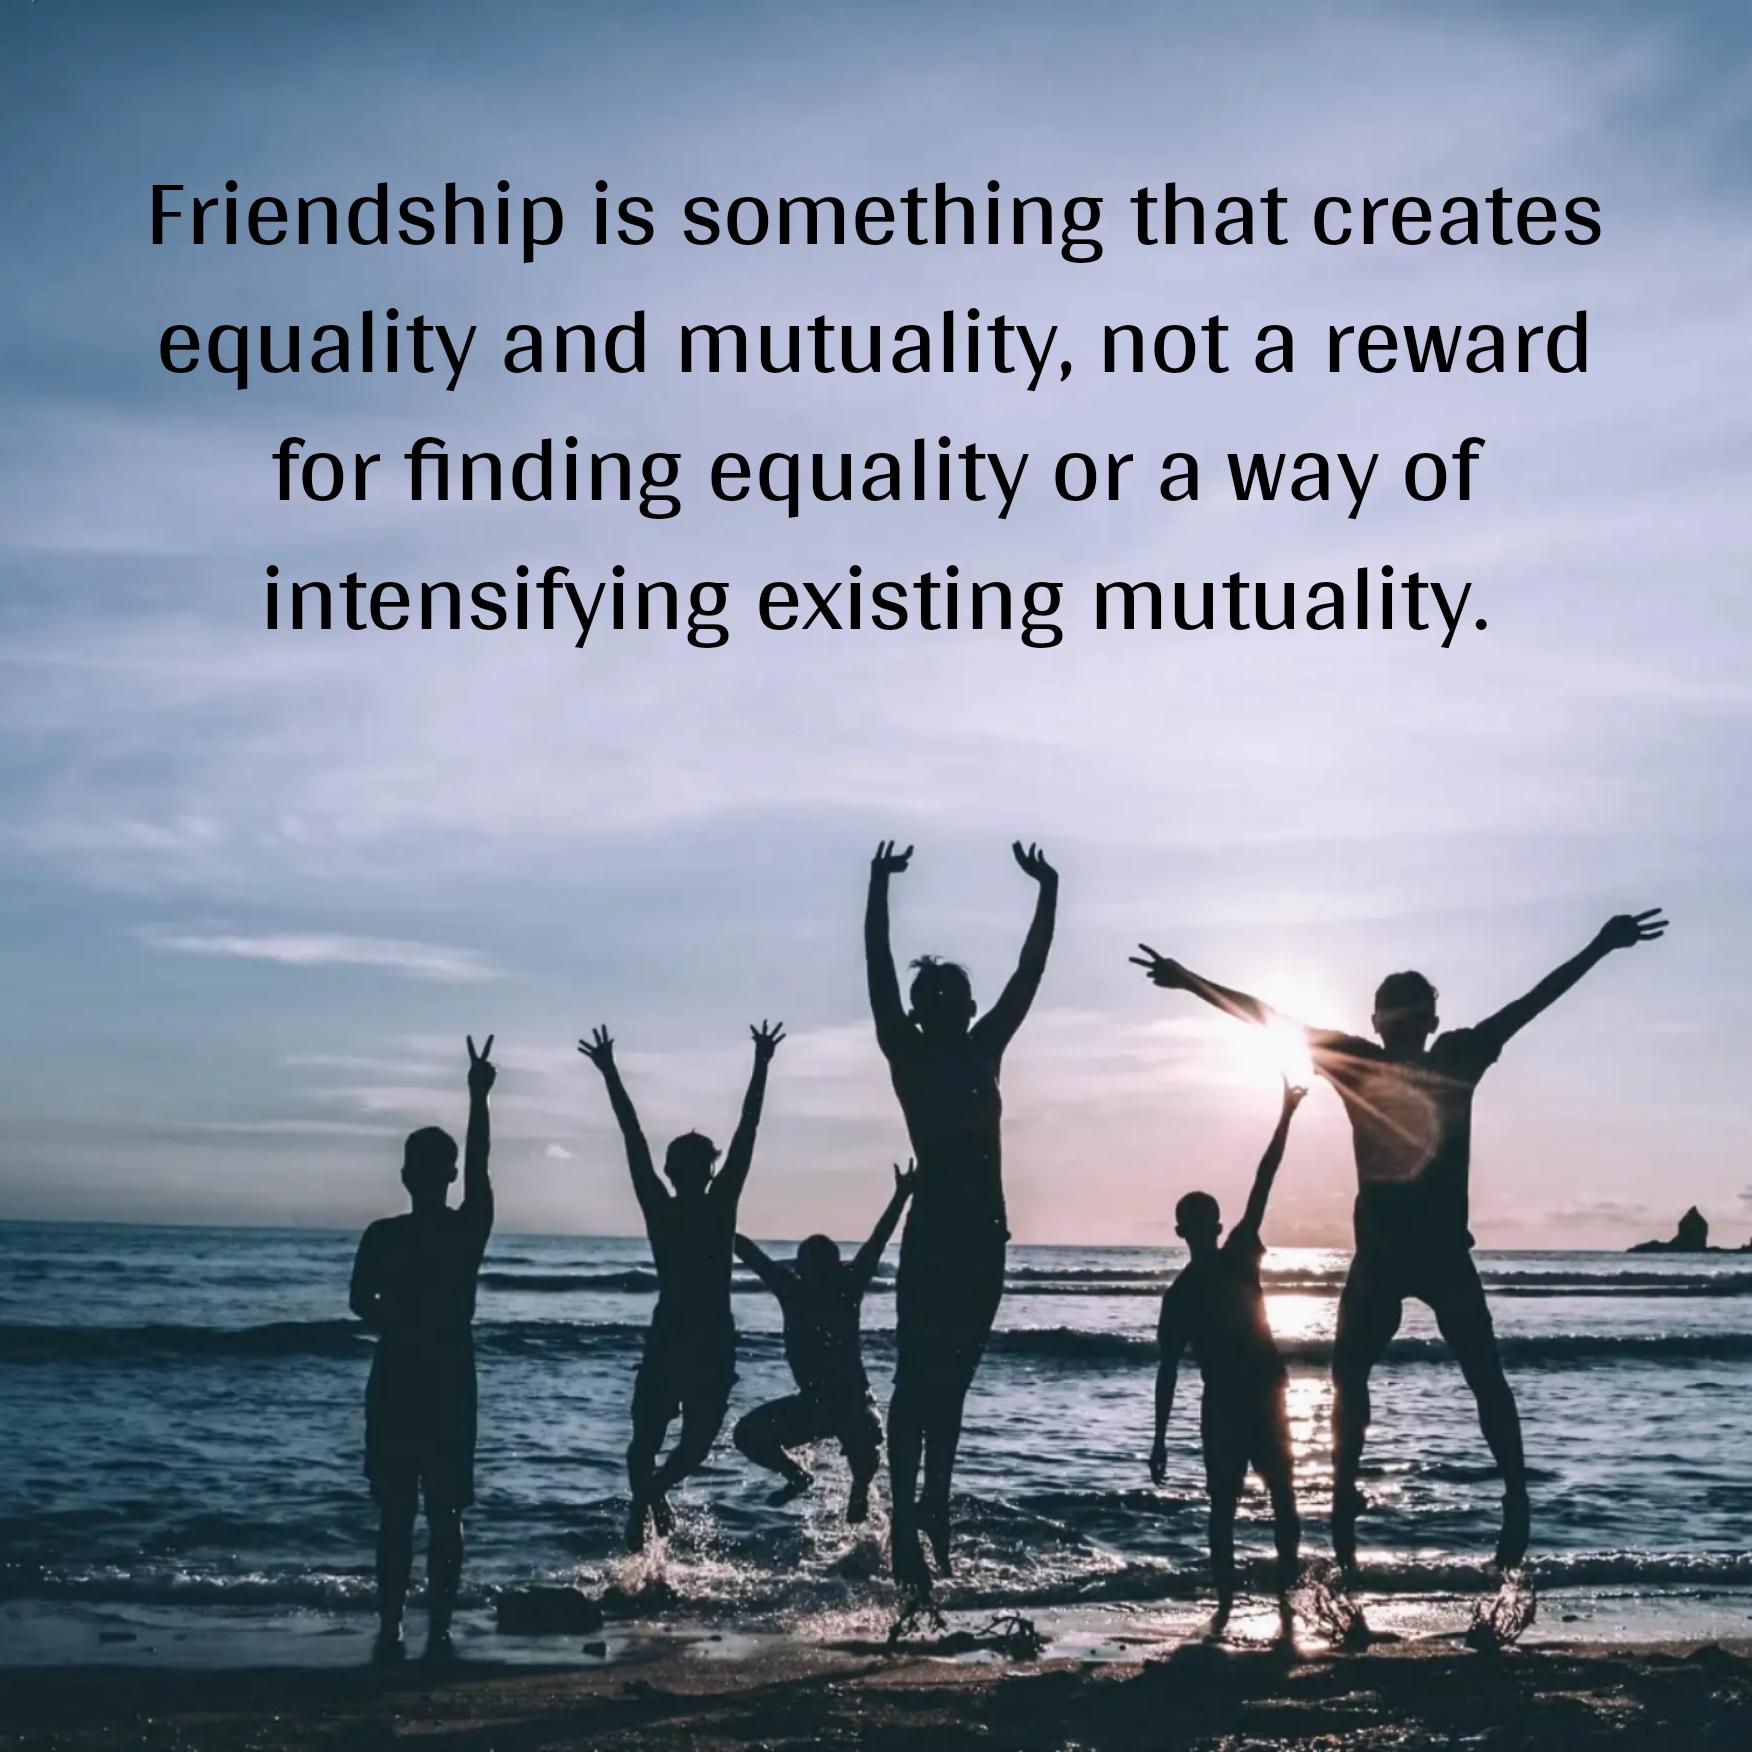 Friendship is something that creates equality and mutuality